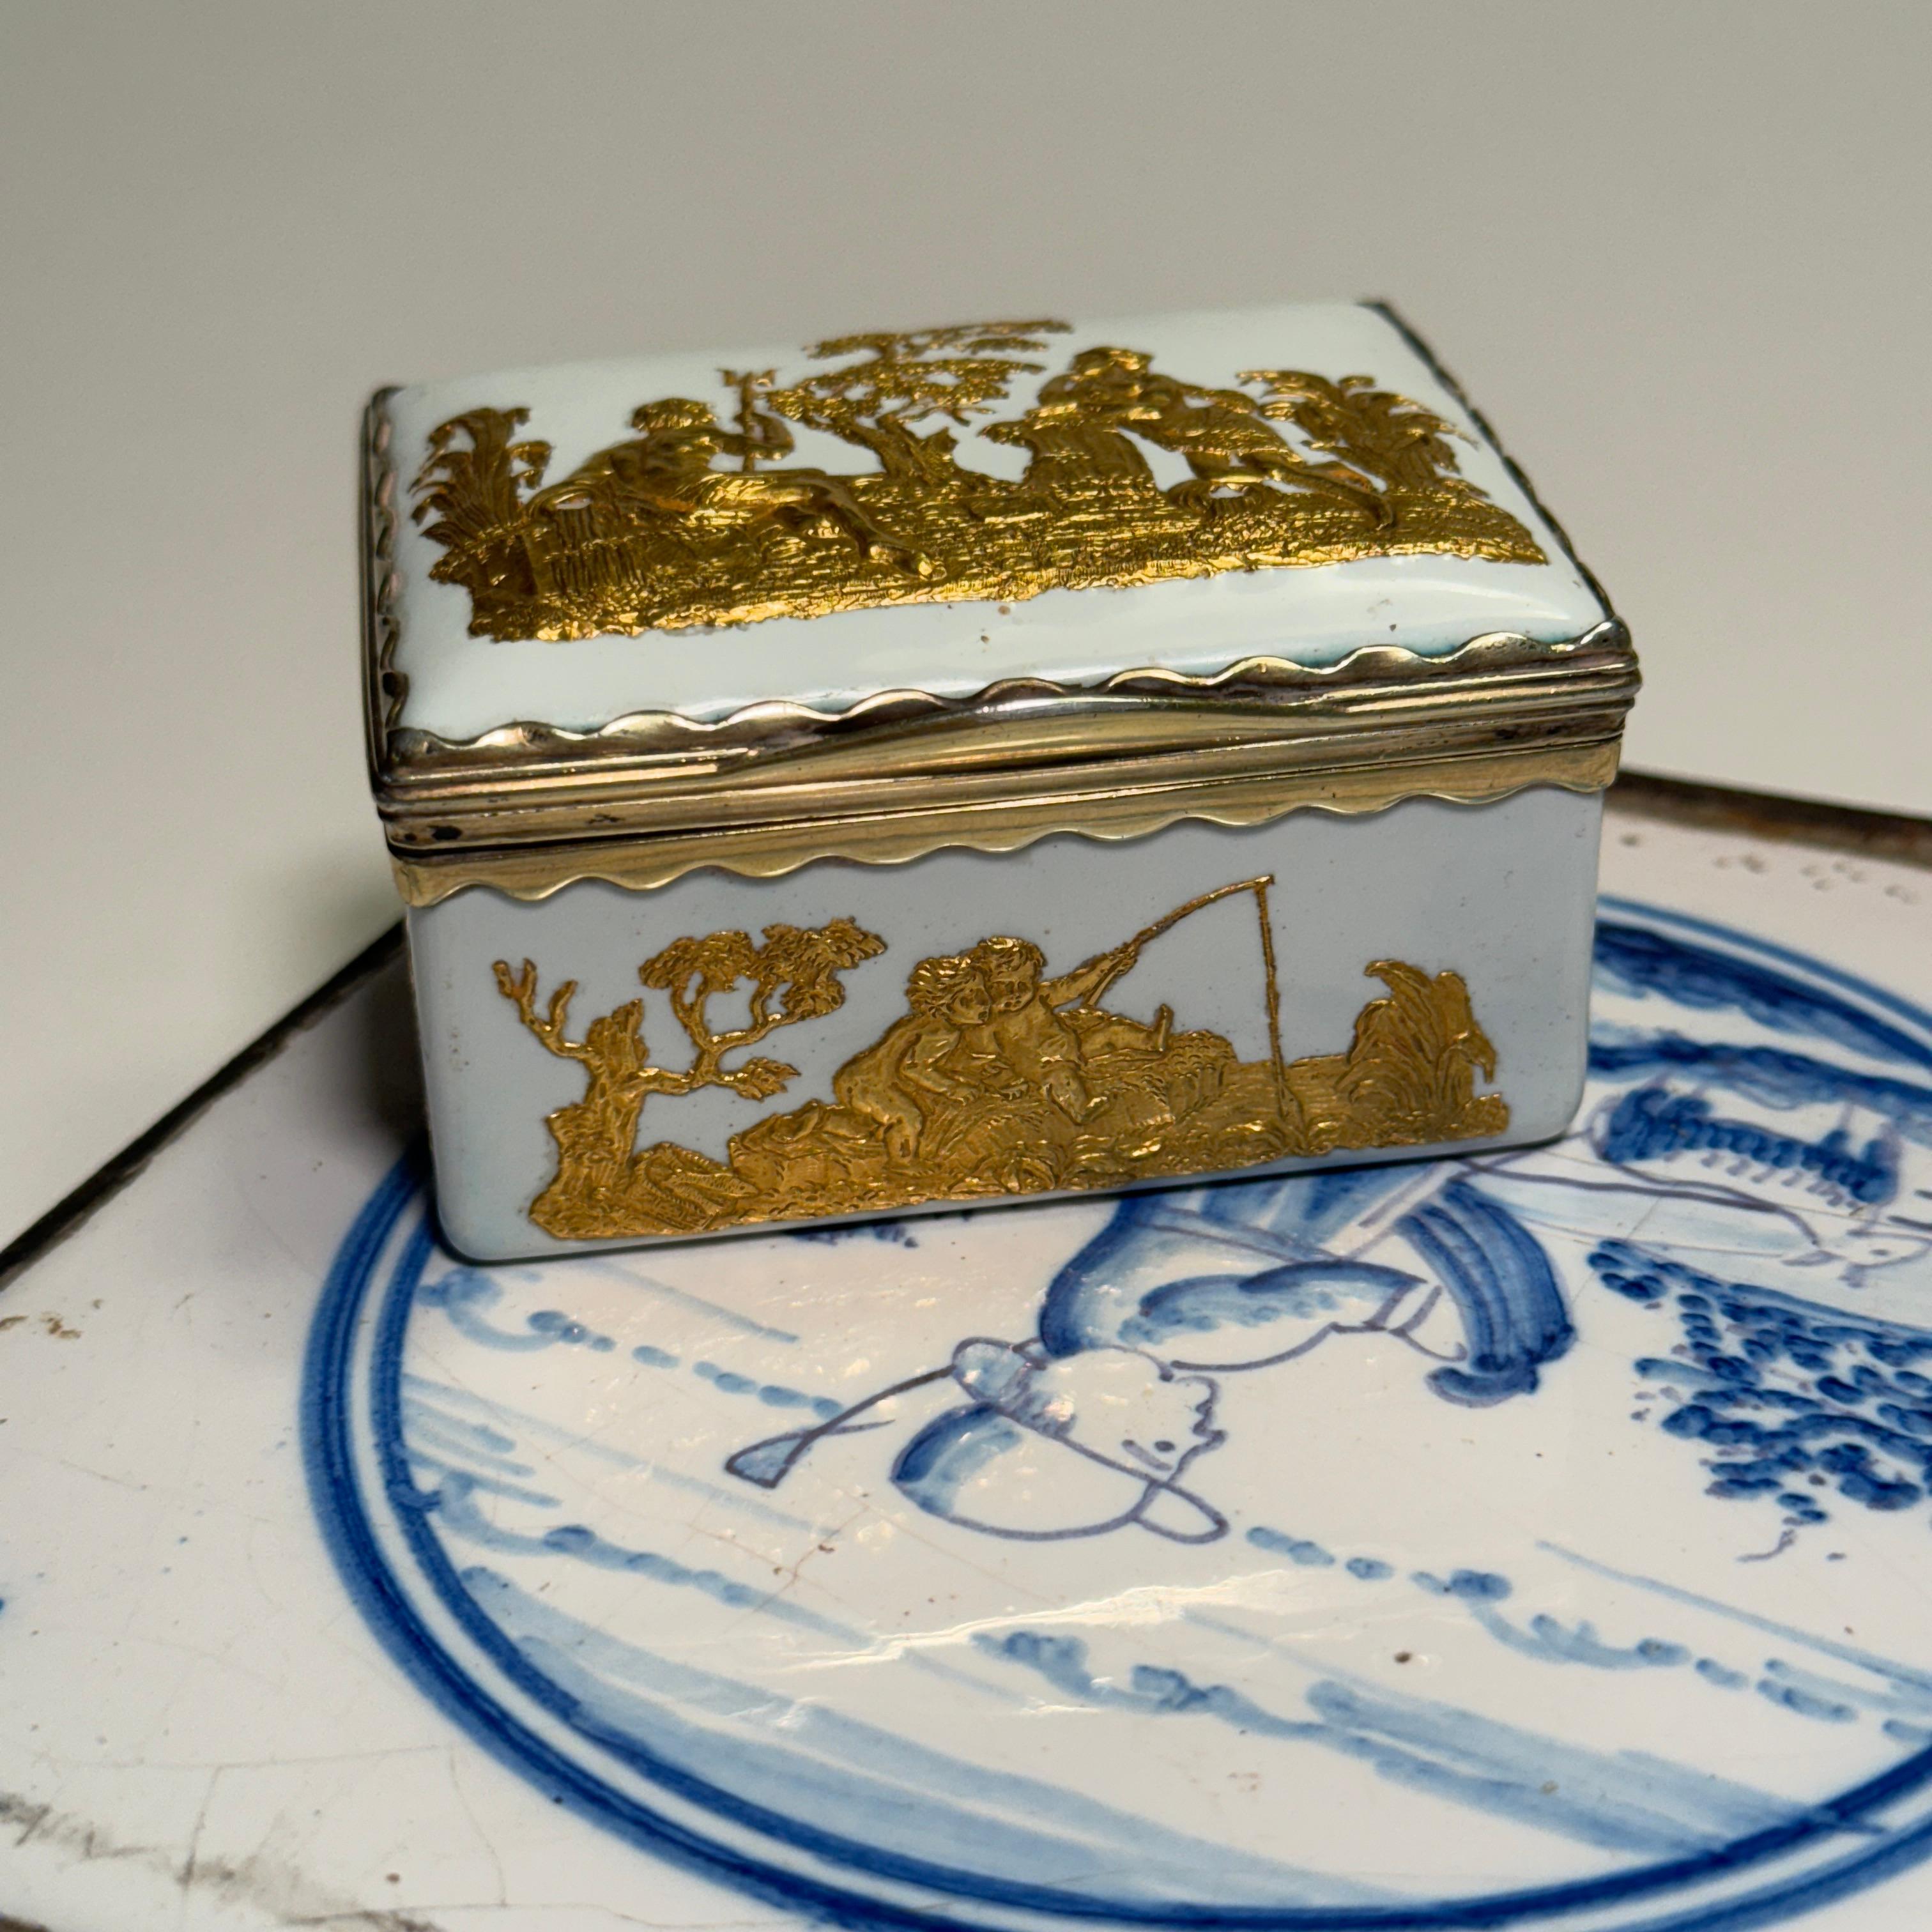 Mid-18th Century porcelain snuff tobacco box with Ormulu gilt embossed relief and with empire classical motives. The inside of the lid is decorated with colorful flowers.
Wonderful addition to any collection on a tabletop or shelves. This classic